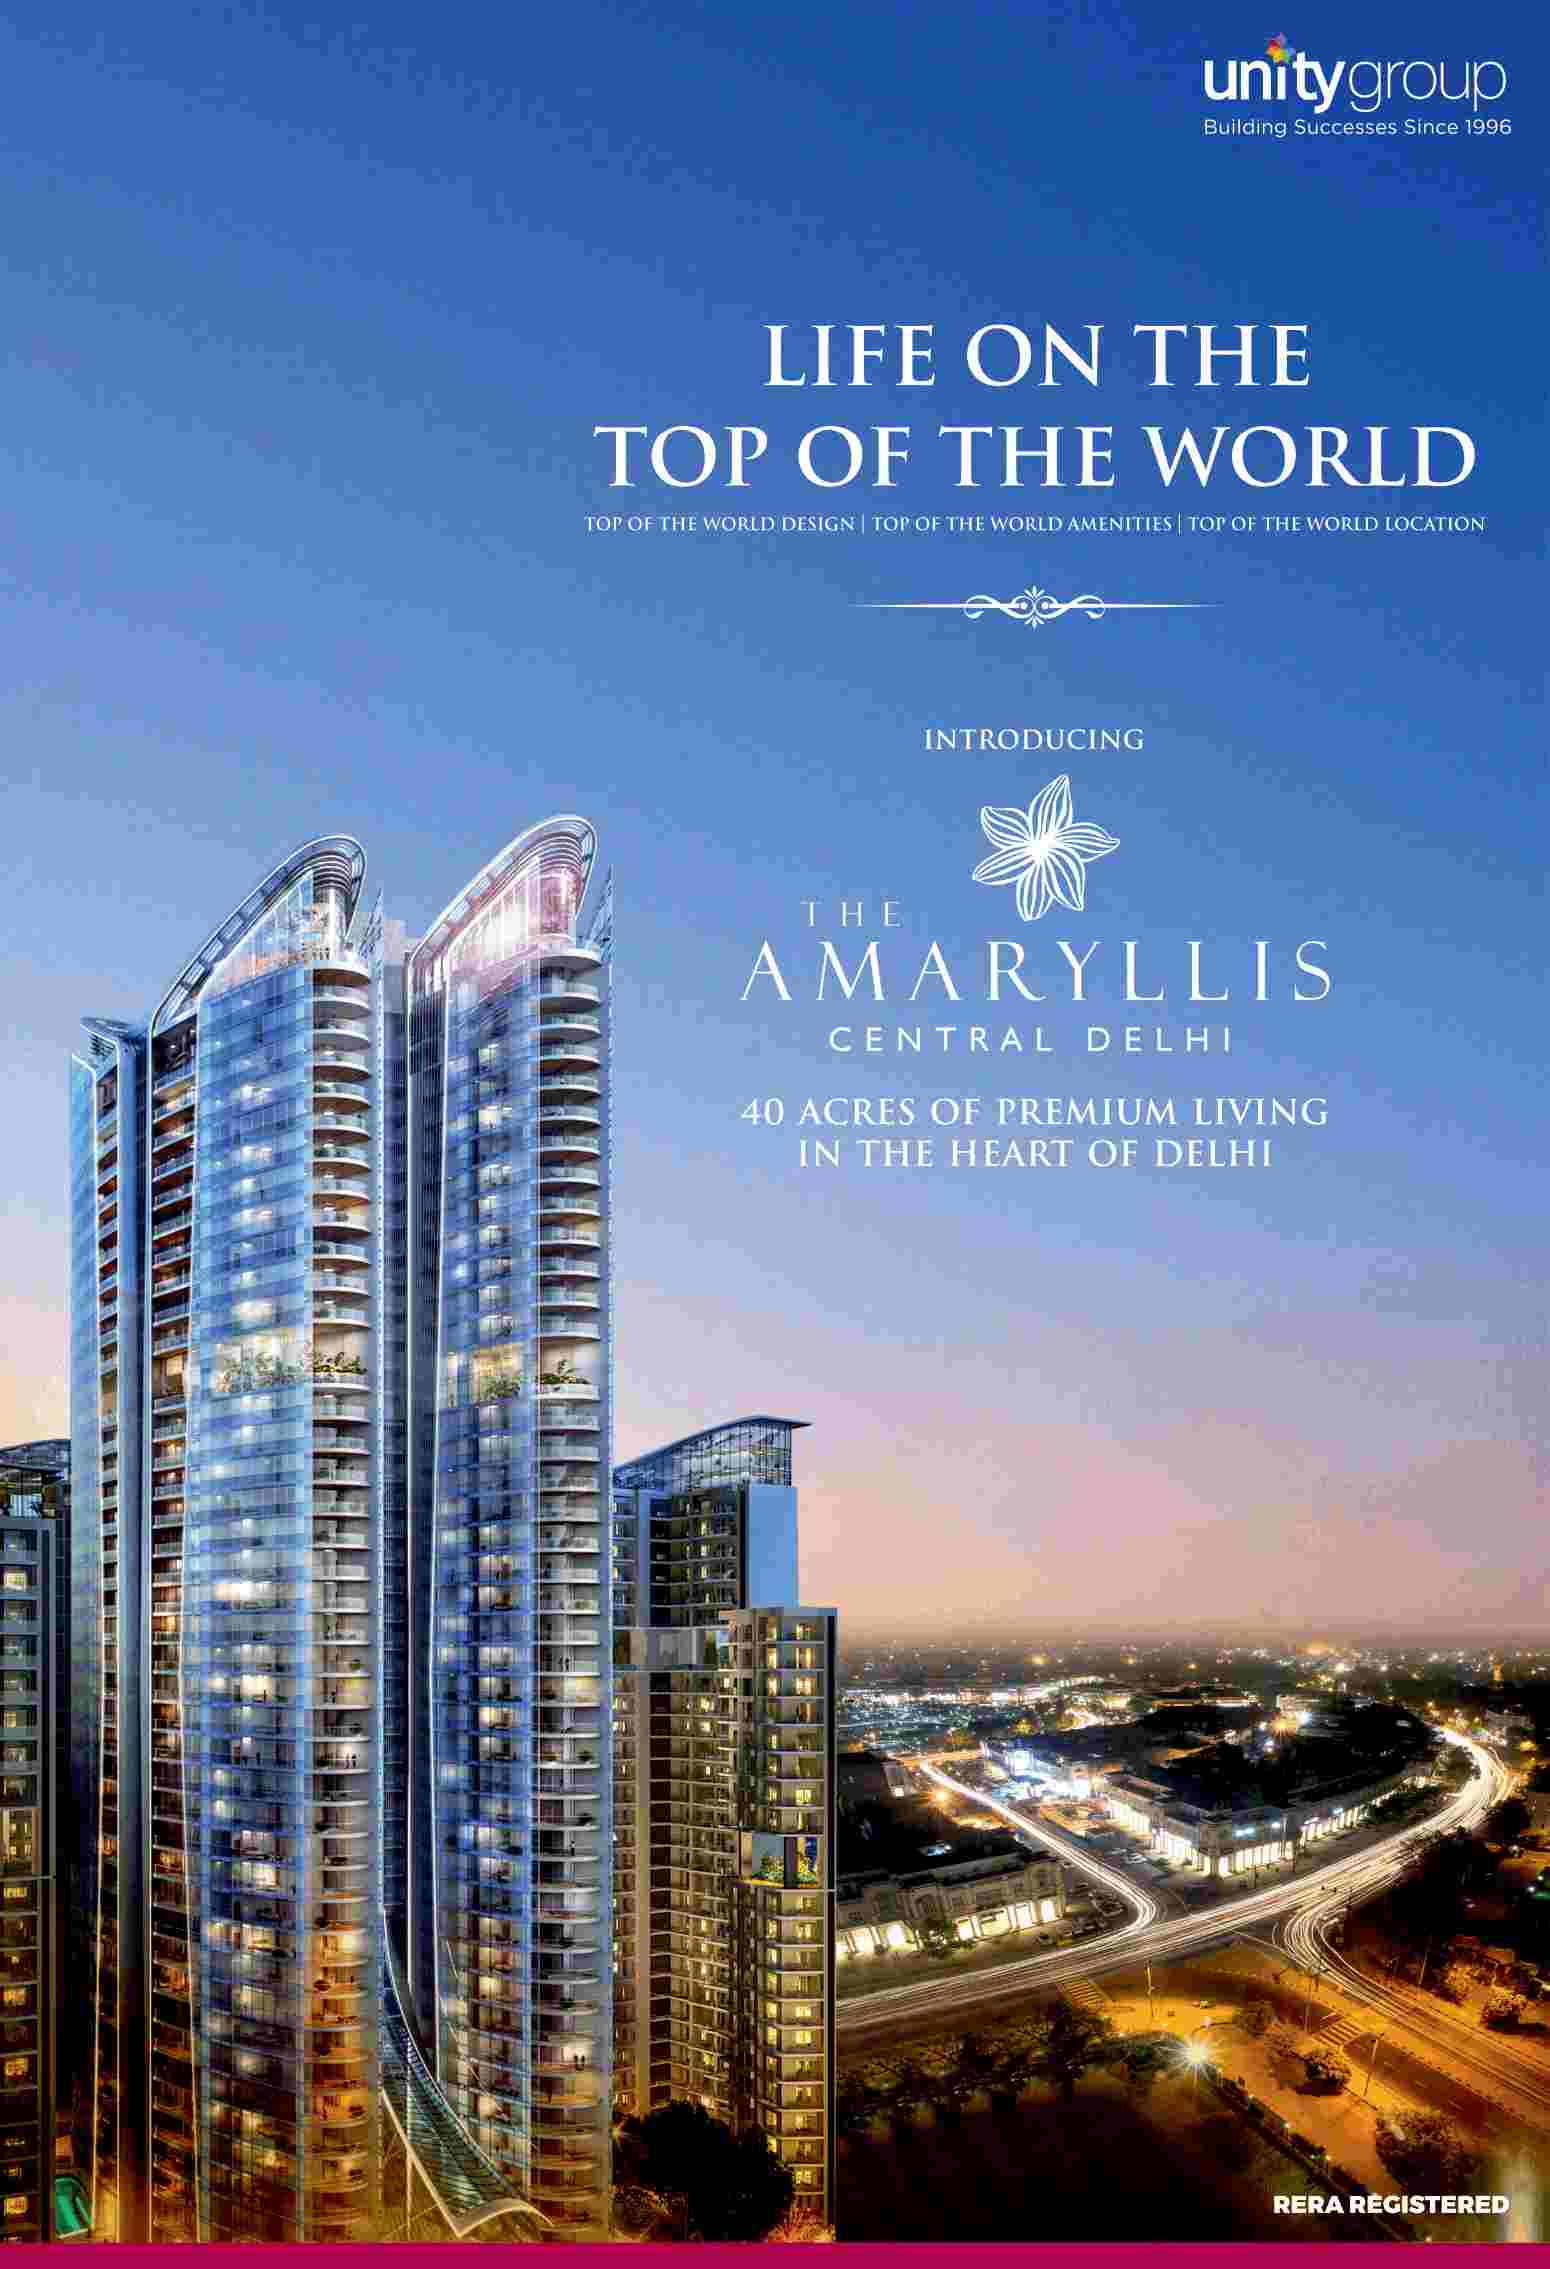 Experience 40 acres of premium living in the heart of Delhi at Unity The Amaryllis